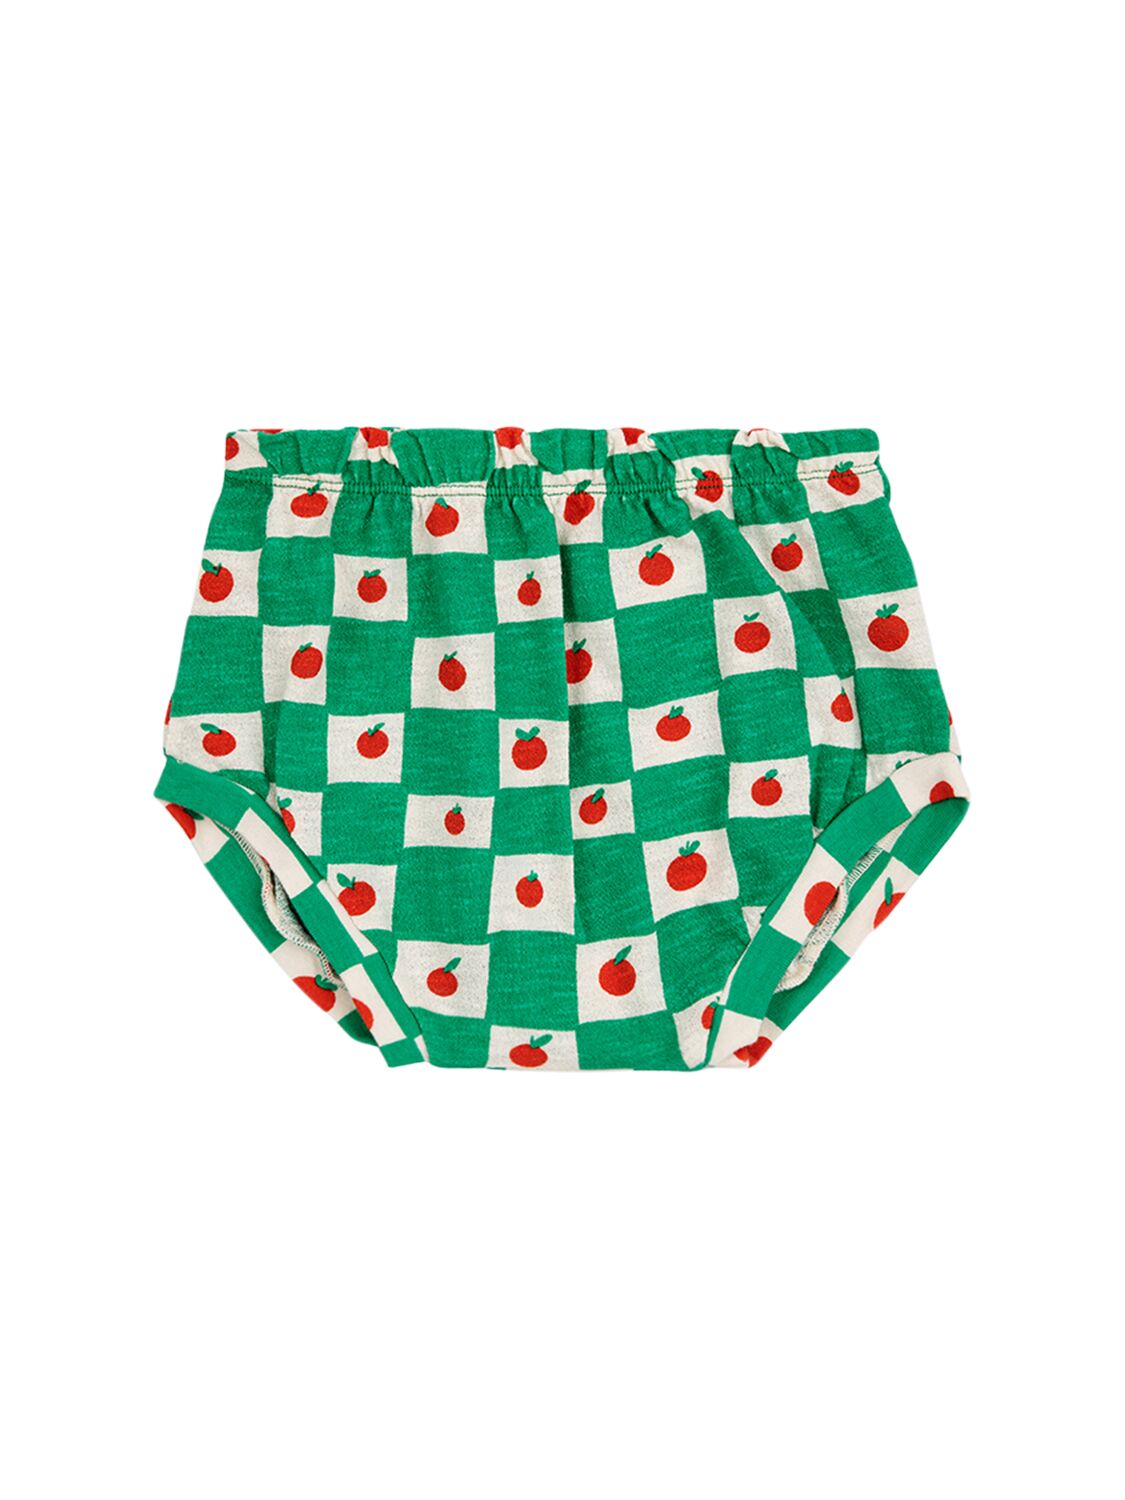 Image of Printed Organic Cotton Diaper Cover